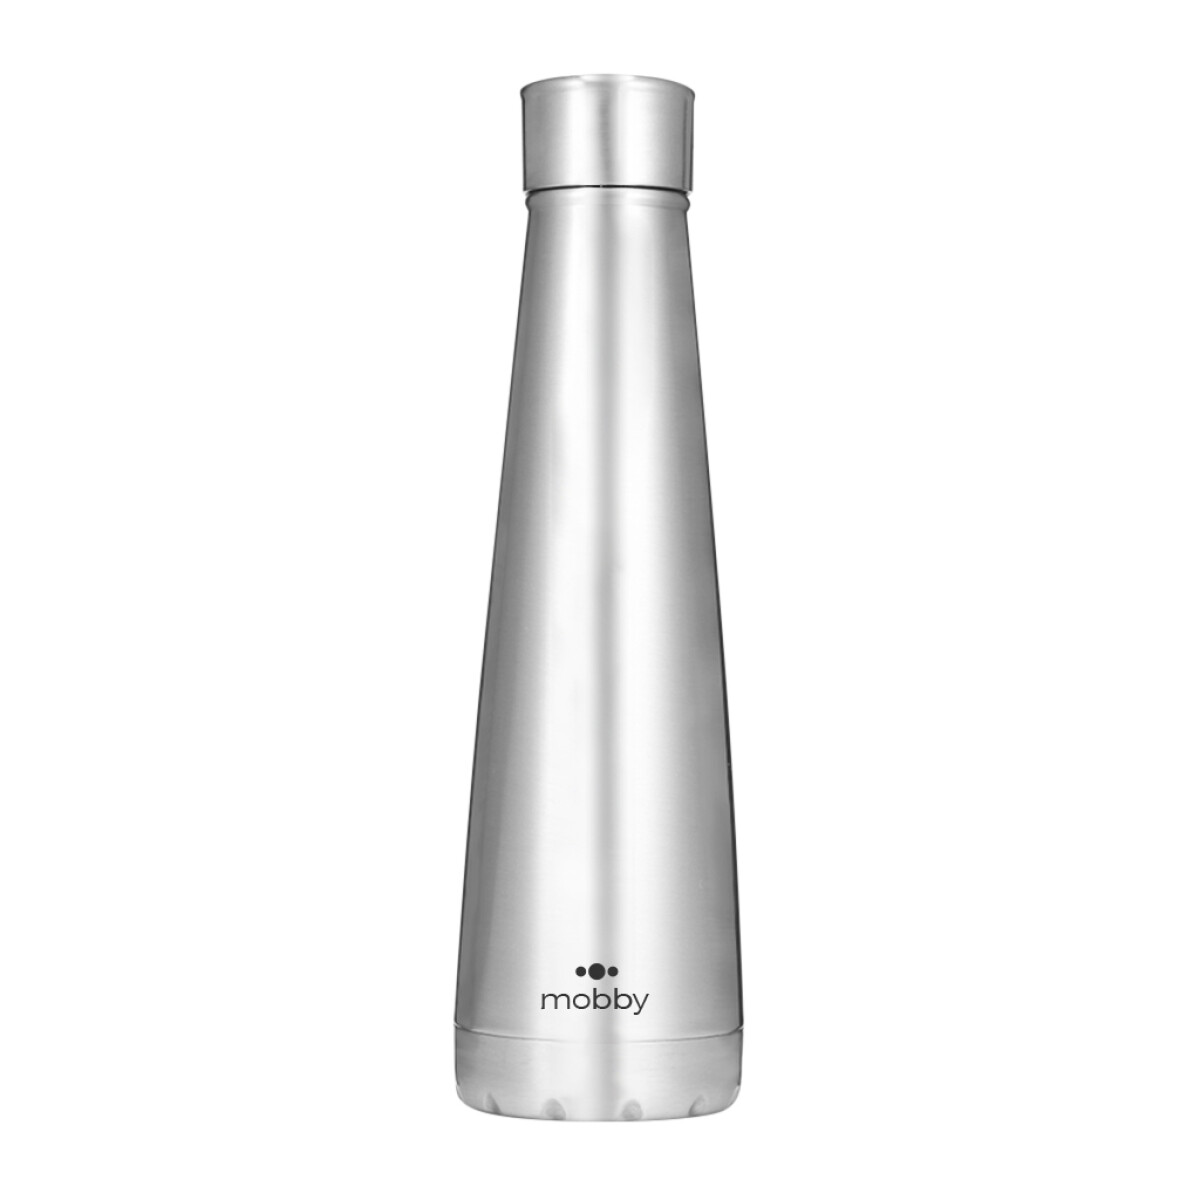 BOTELLA CONICA A.INOX 500ML DOBLE PARED MOBBY 